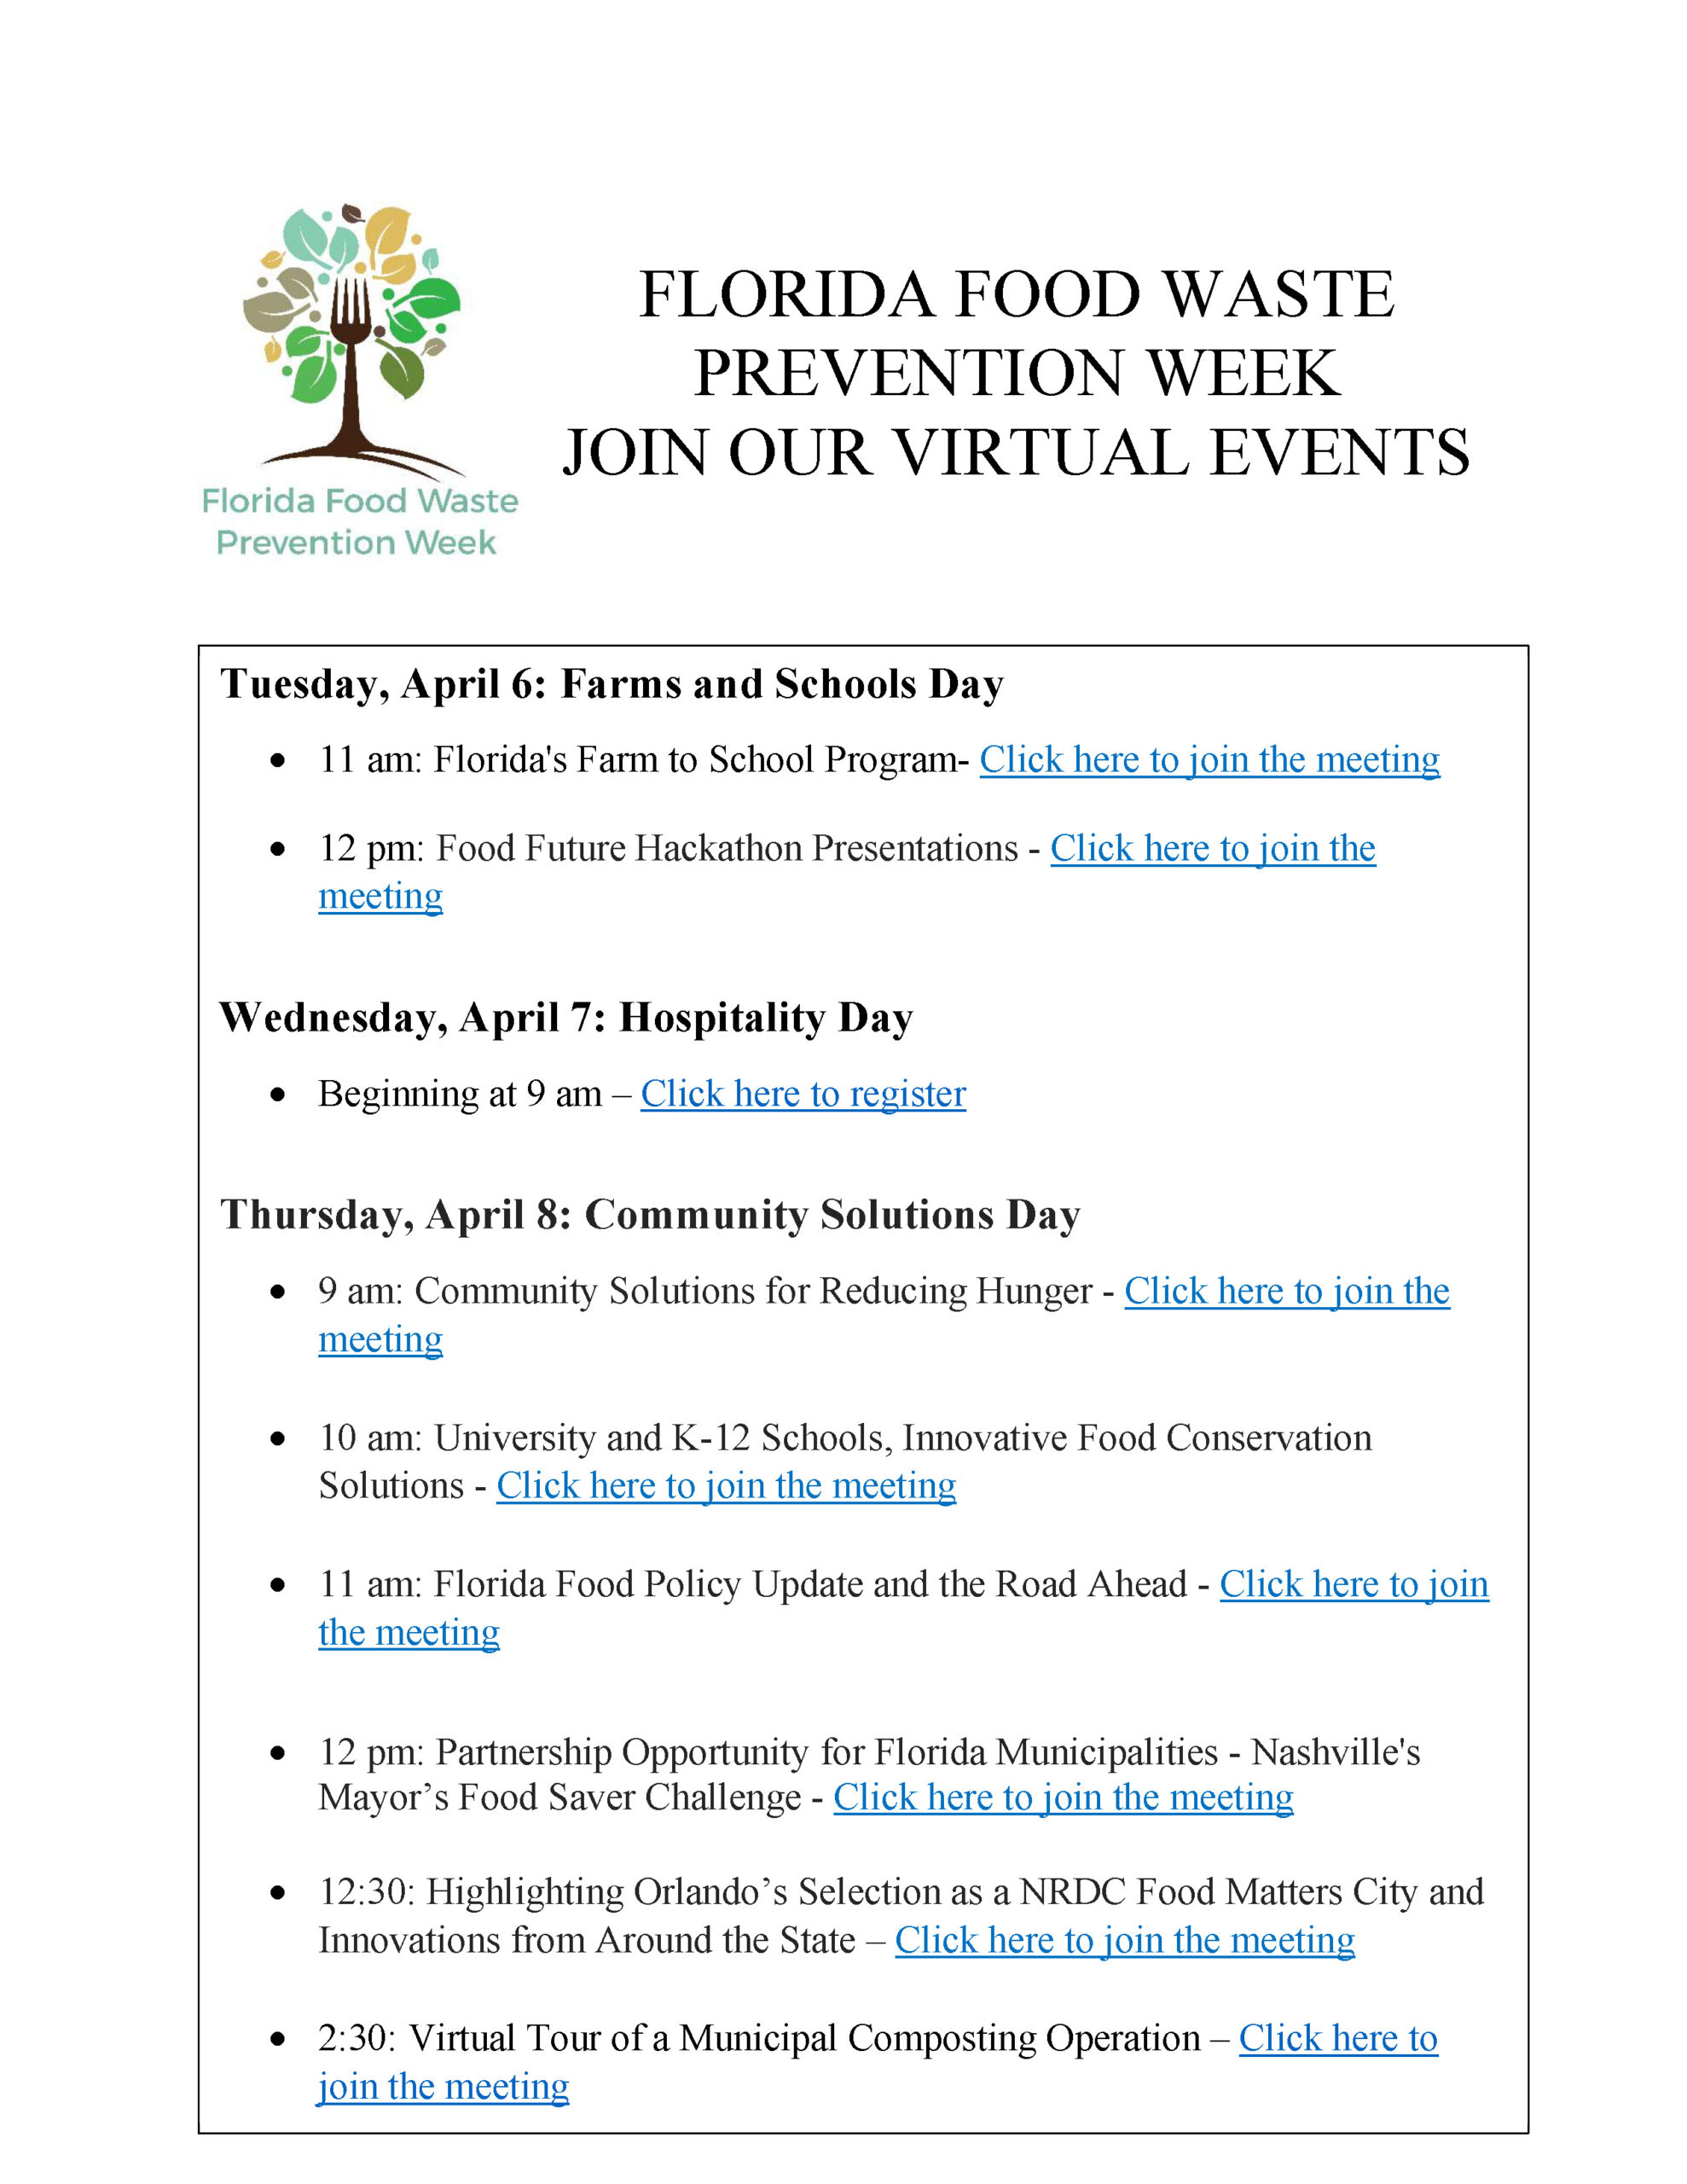 https://recyclefloridatoday.org/wp-content/uploads/2021/04/Florida-Food-Waste-Prevention-Week-Meeting-Links.pdf